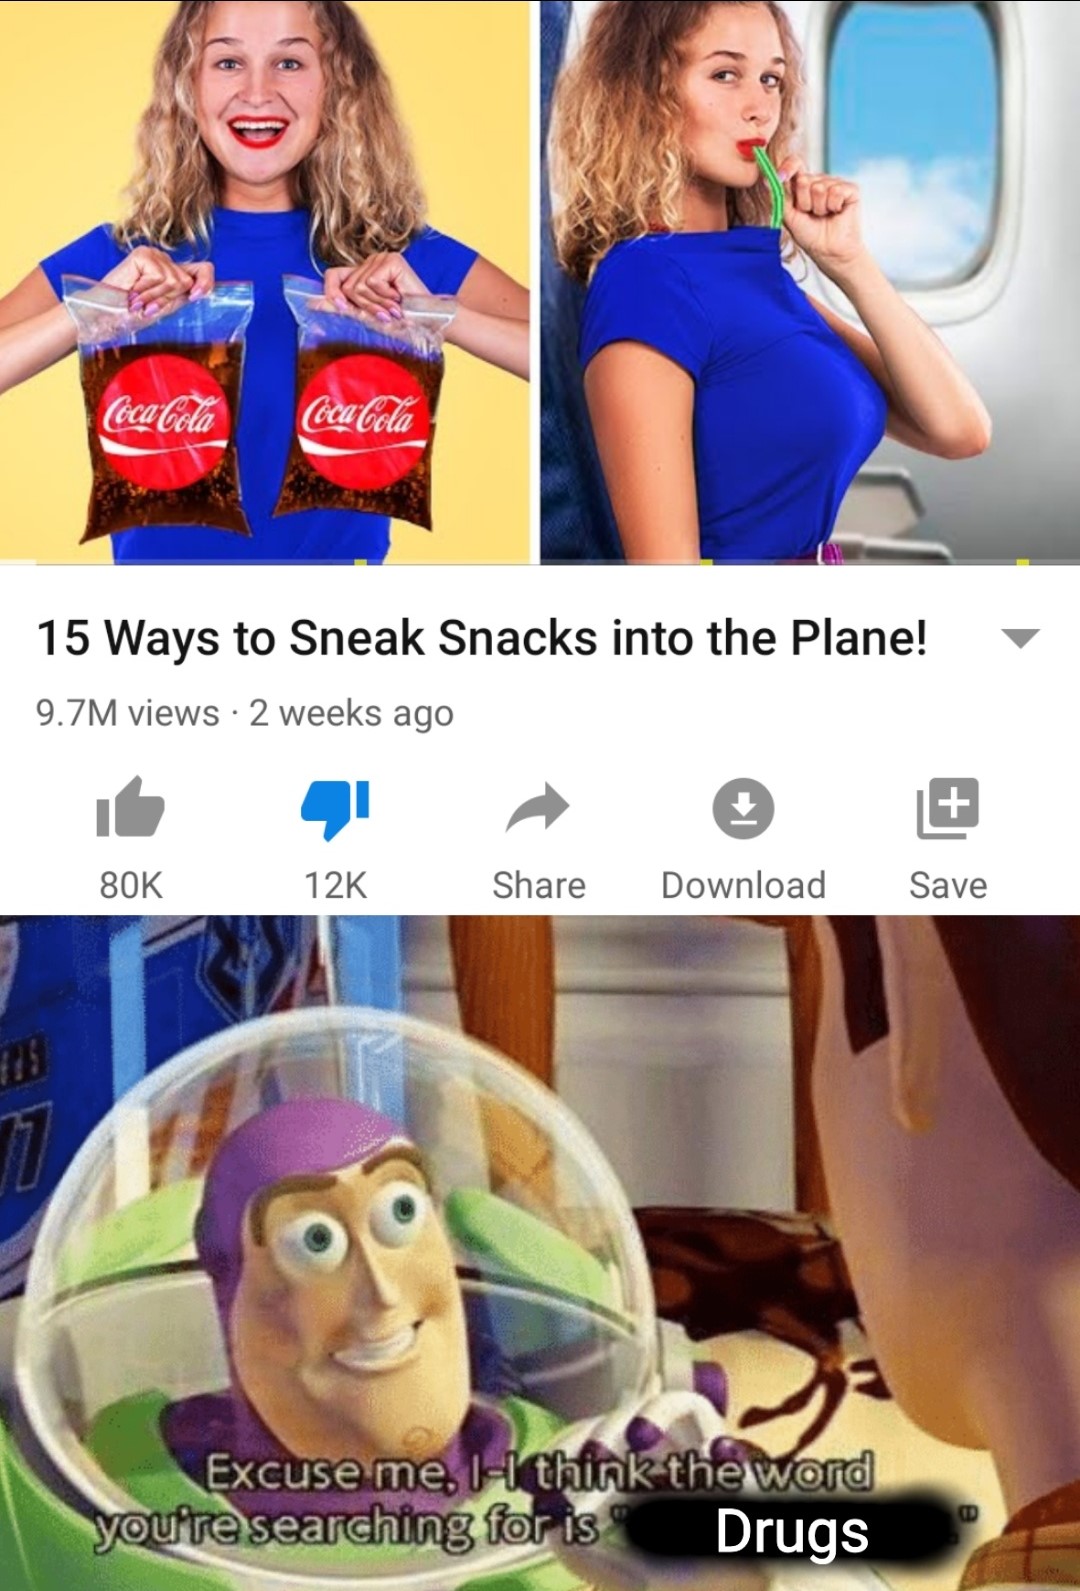 think the word you re searching - Coca Cola Coca Cola 15 Ways to Sneak Snacks into the Plane! 9.7M views 2 weeks ago 80K 12K Download Save tos Excuse me, II think the word youre searching for is Drugs